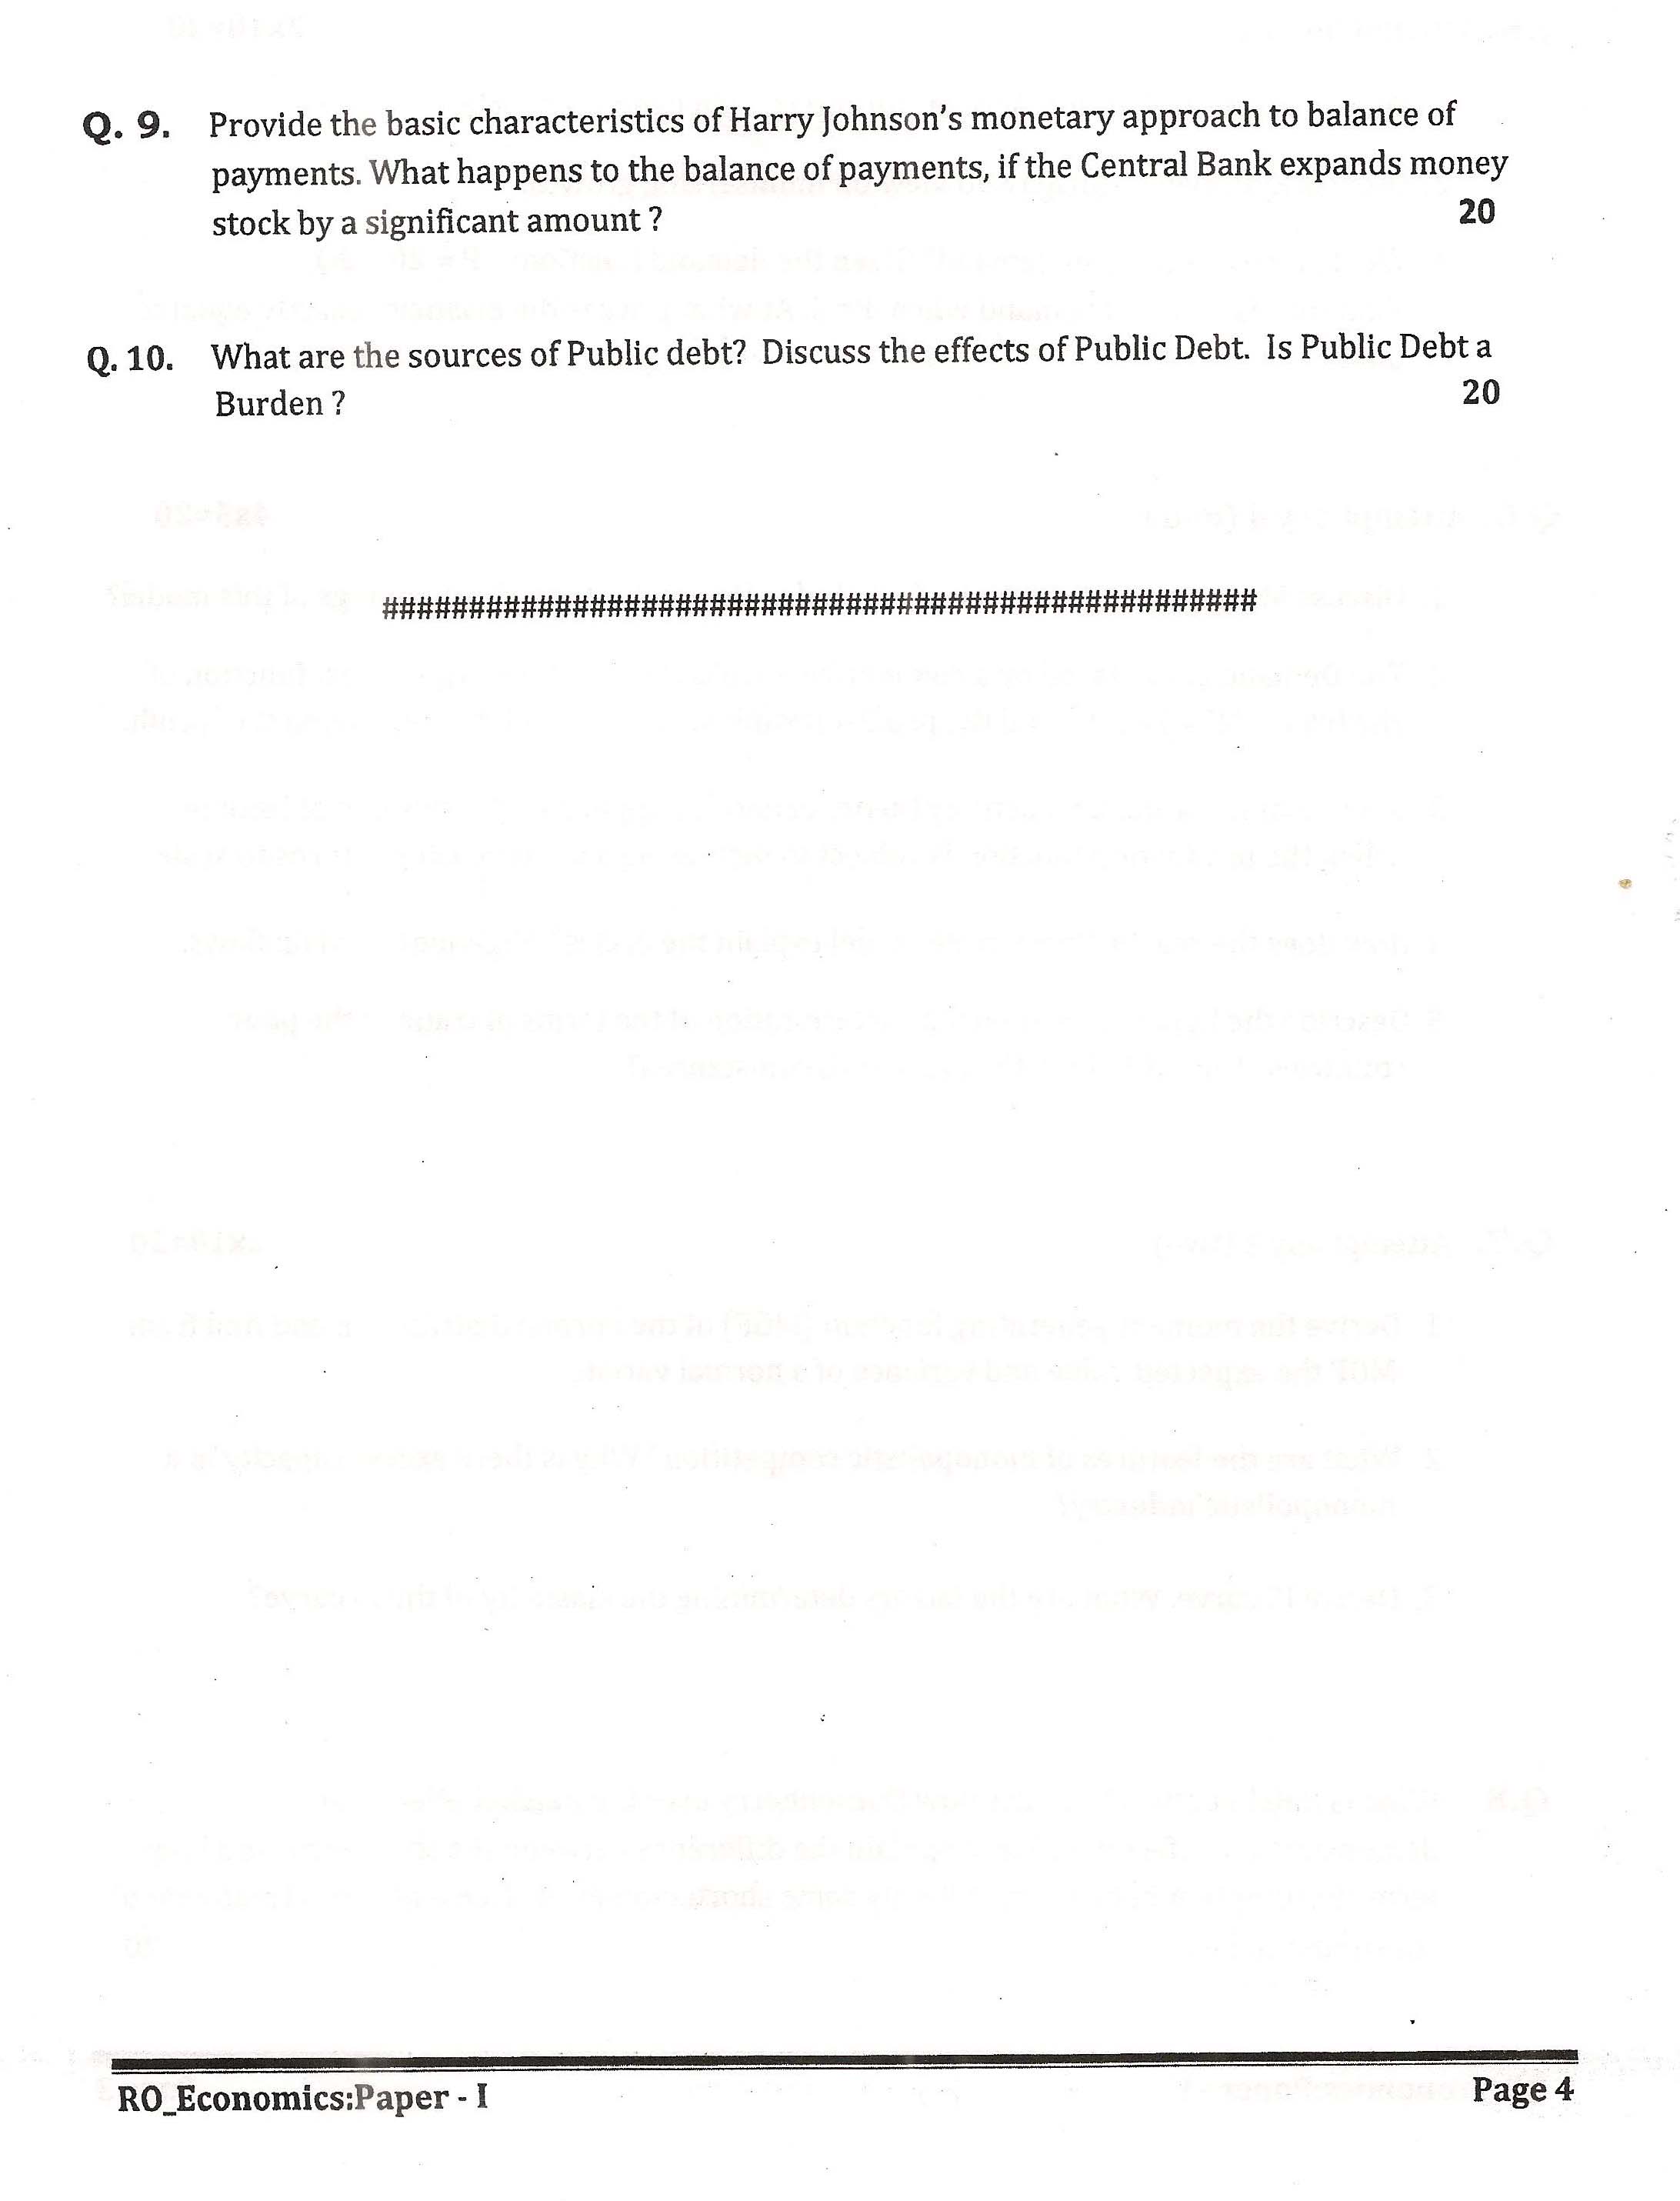 APPSC Research Officer Economics Paper I Exam Question Paper 2014 4